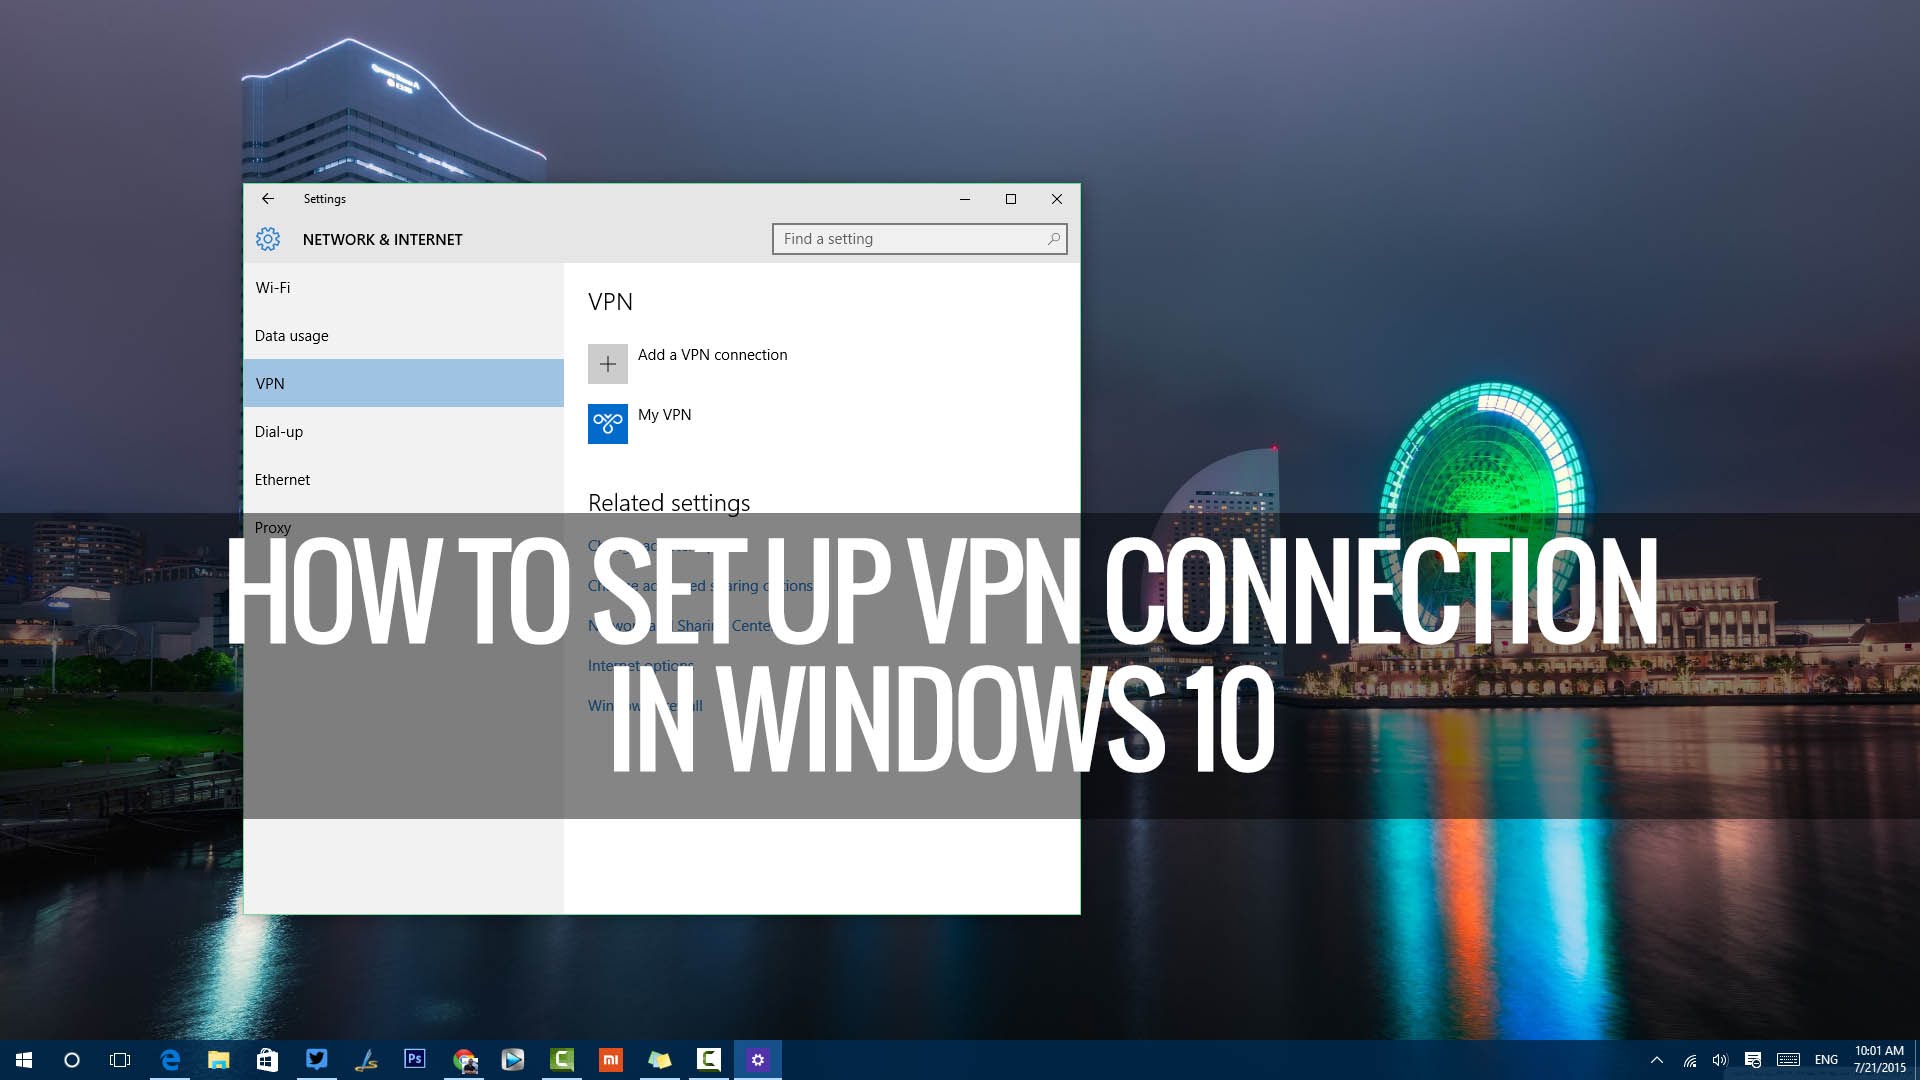 How To Set Up A VPN In Windows 10 - Here's The Ultimate Guide